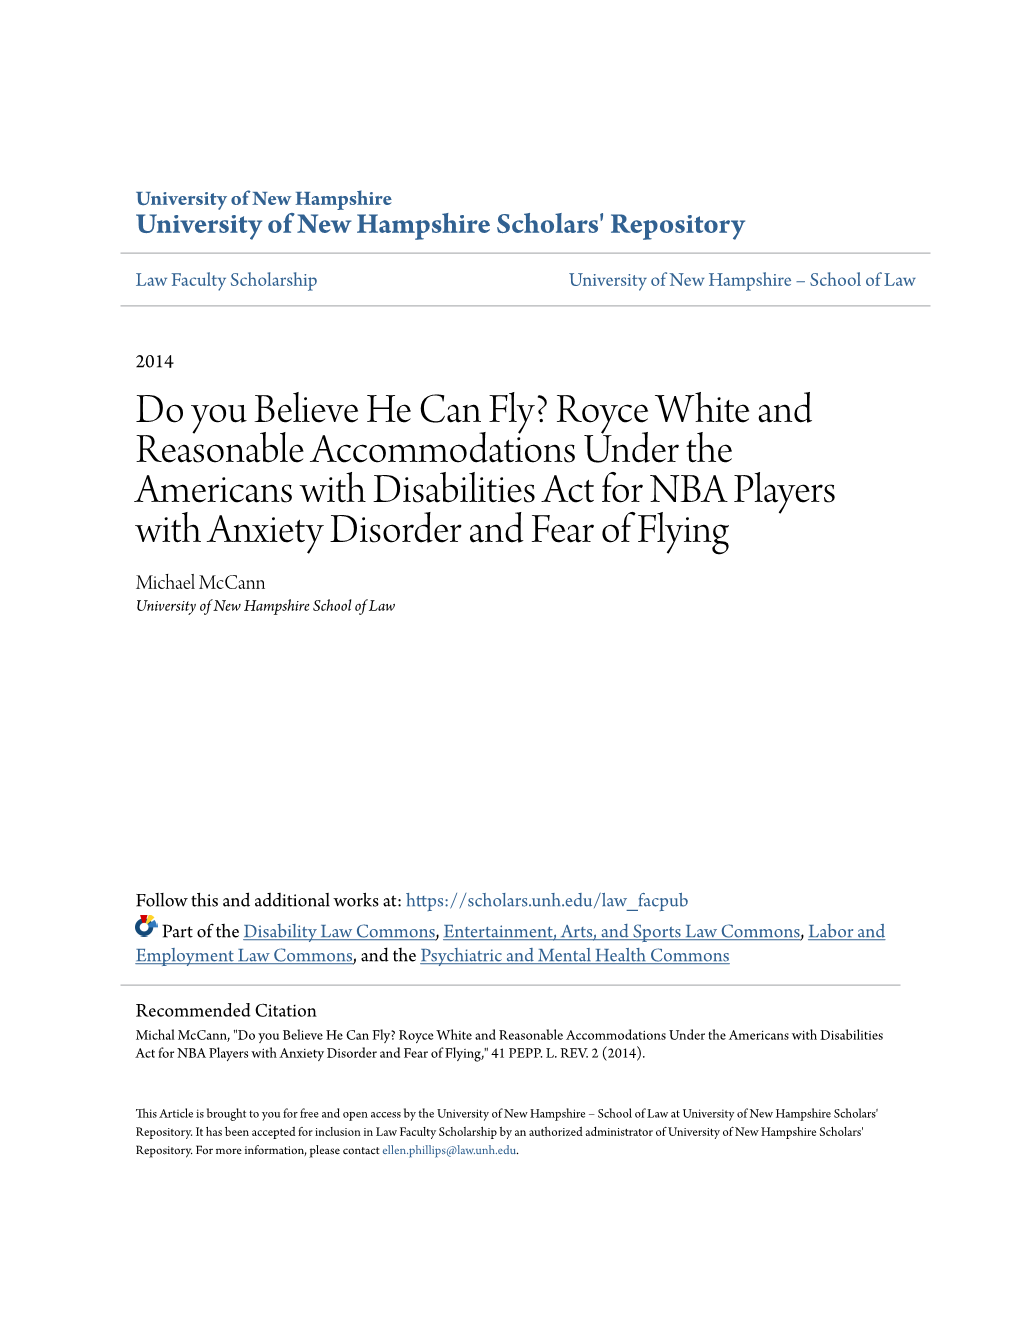 Royce White and Reasonable Accommodations Under the Americans with Disabilities Act for NBA Players W